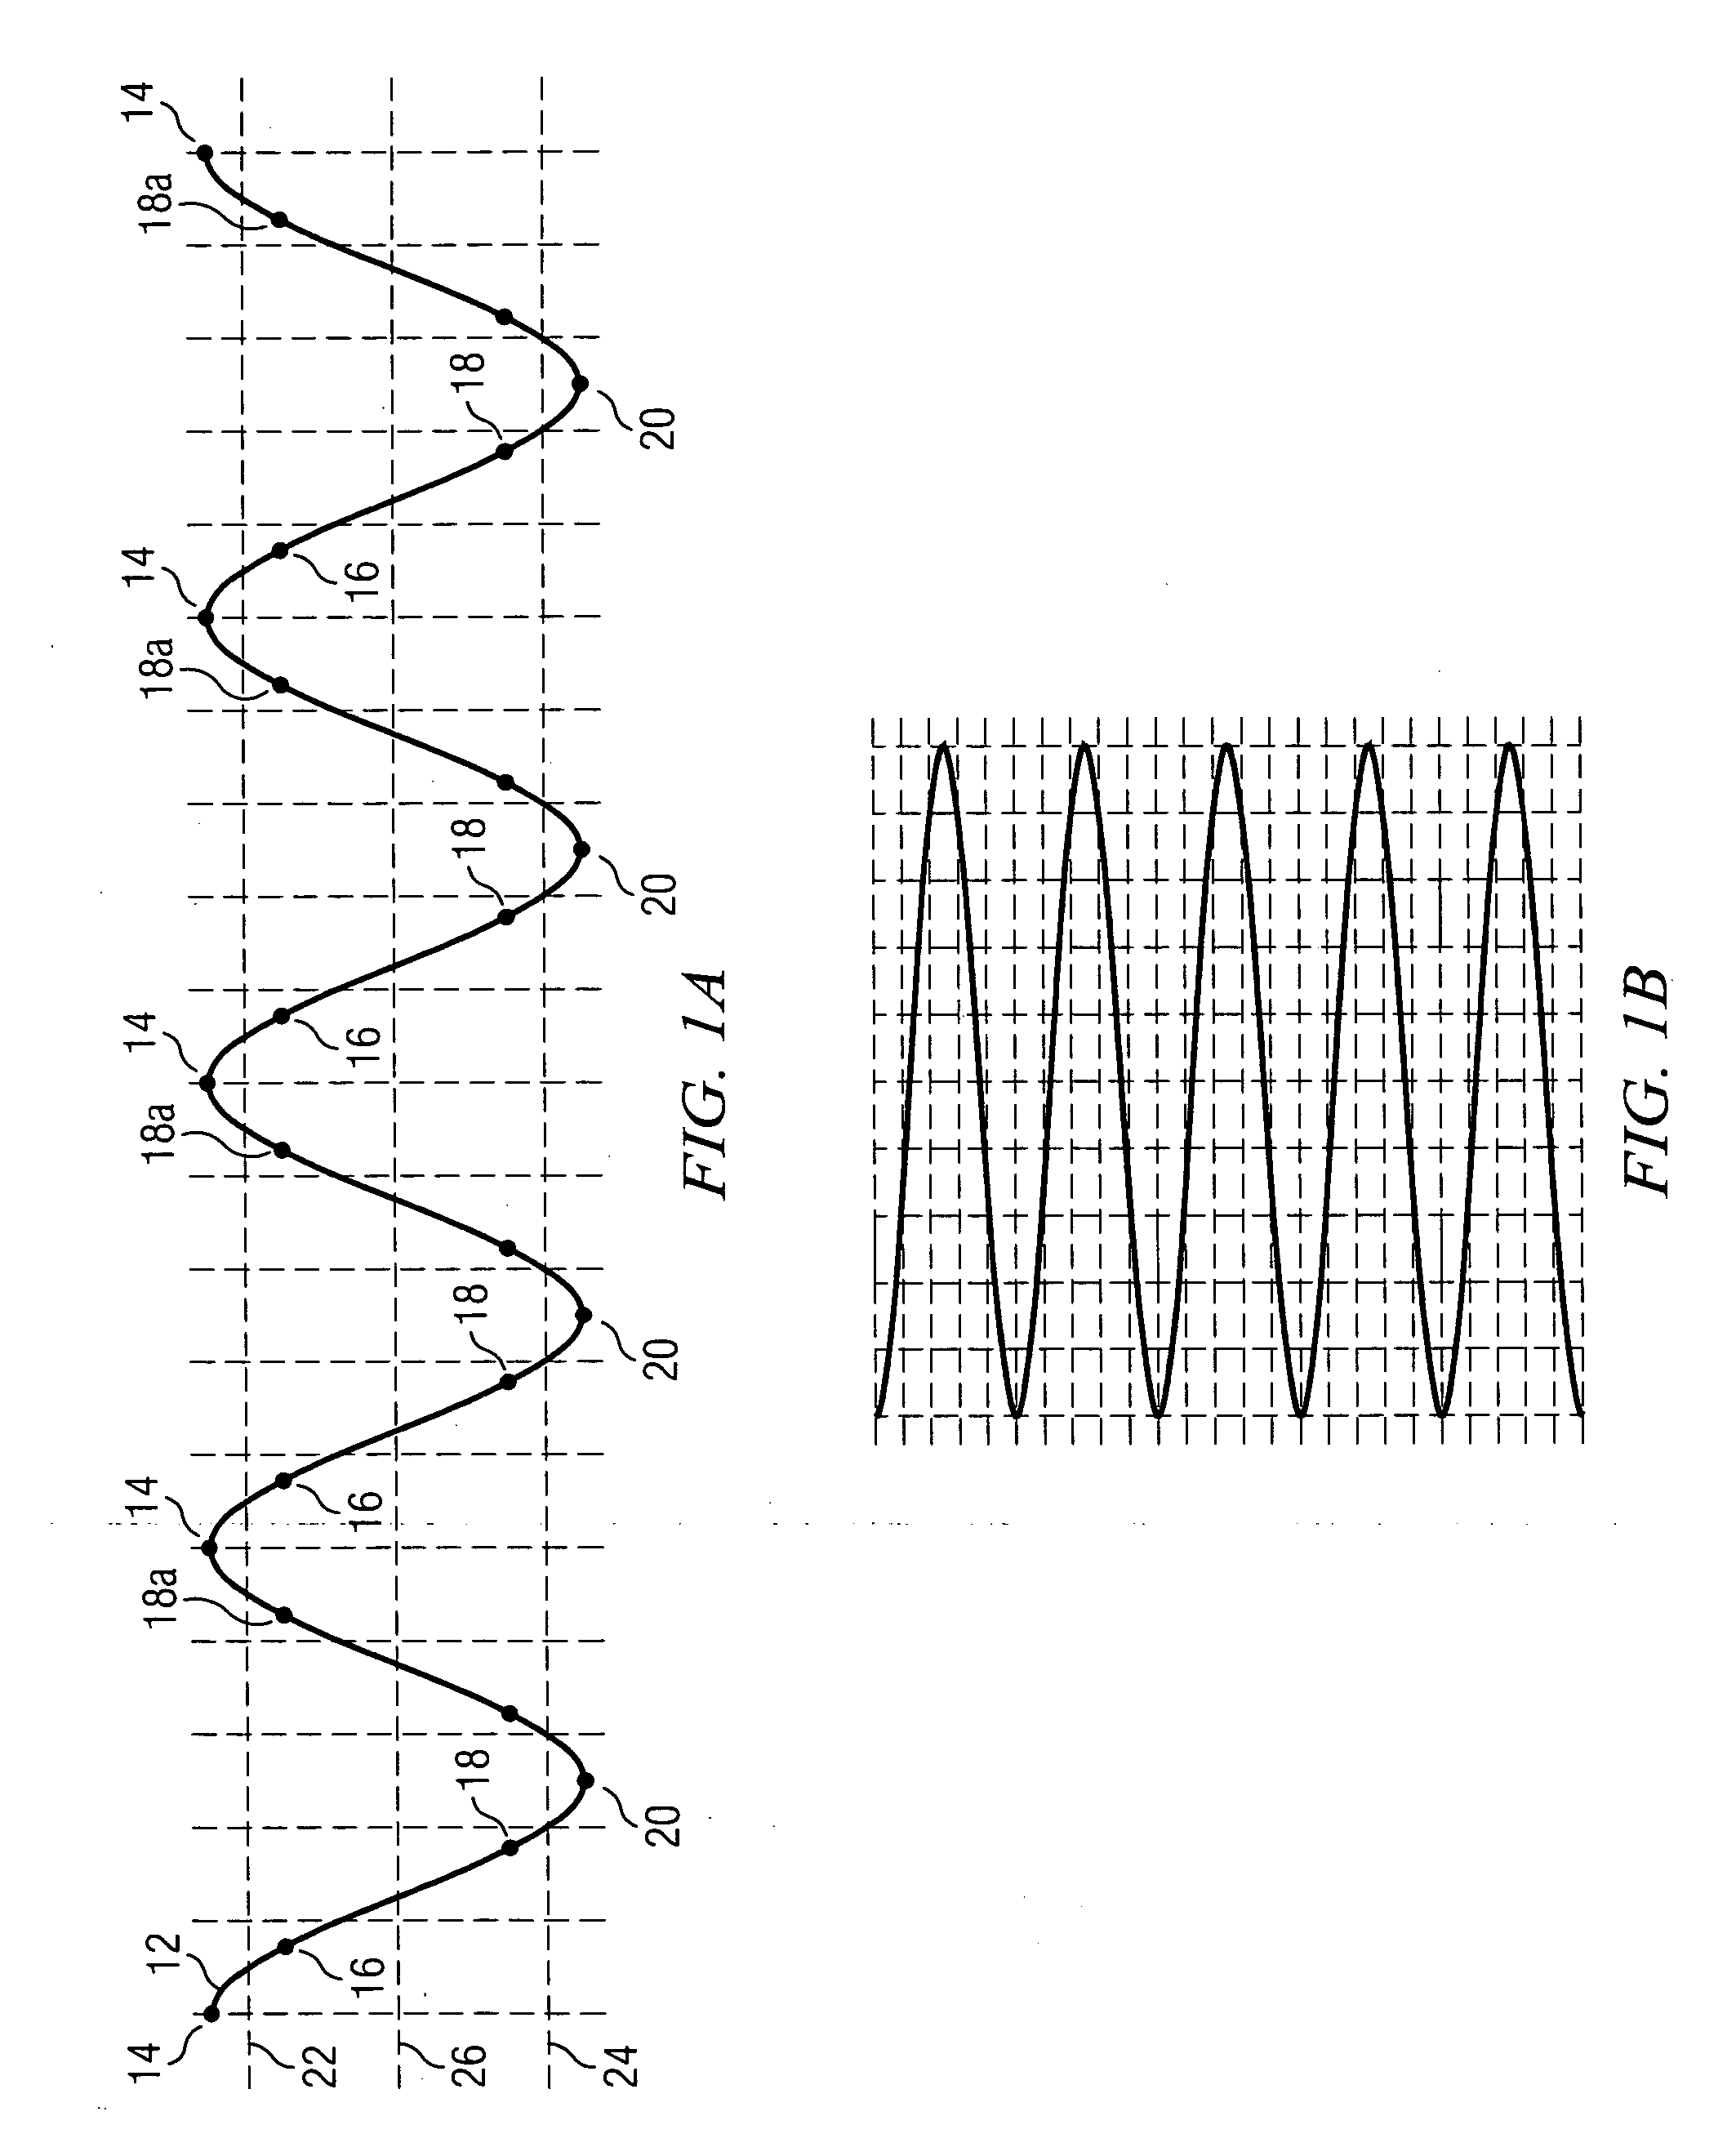 Method for synchronizing an image data source and a resonant mirror system to generate images